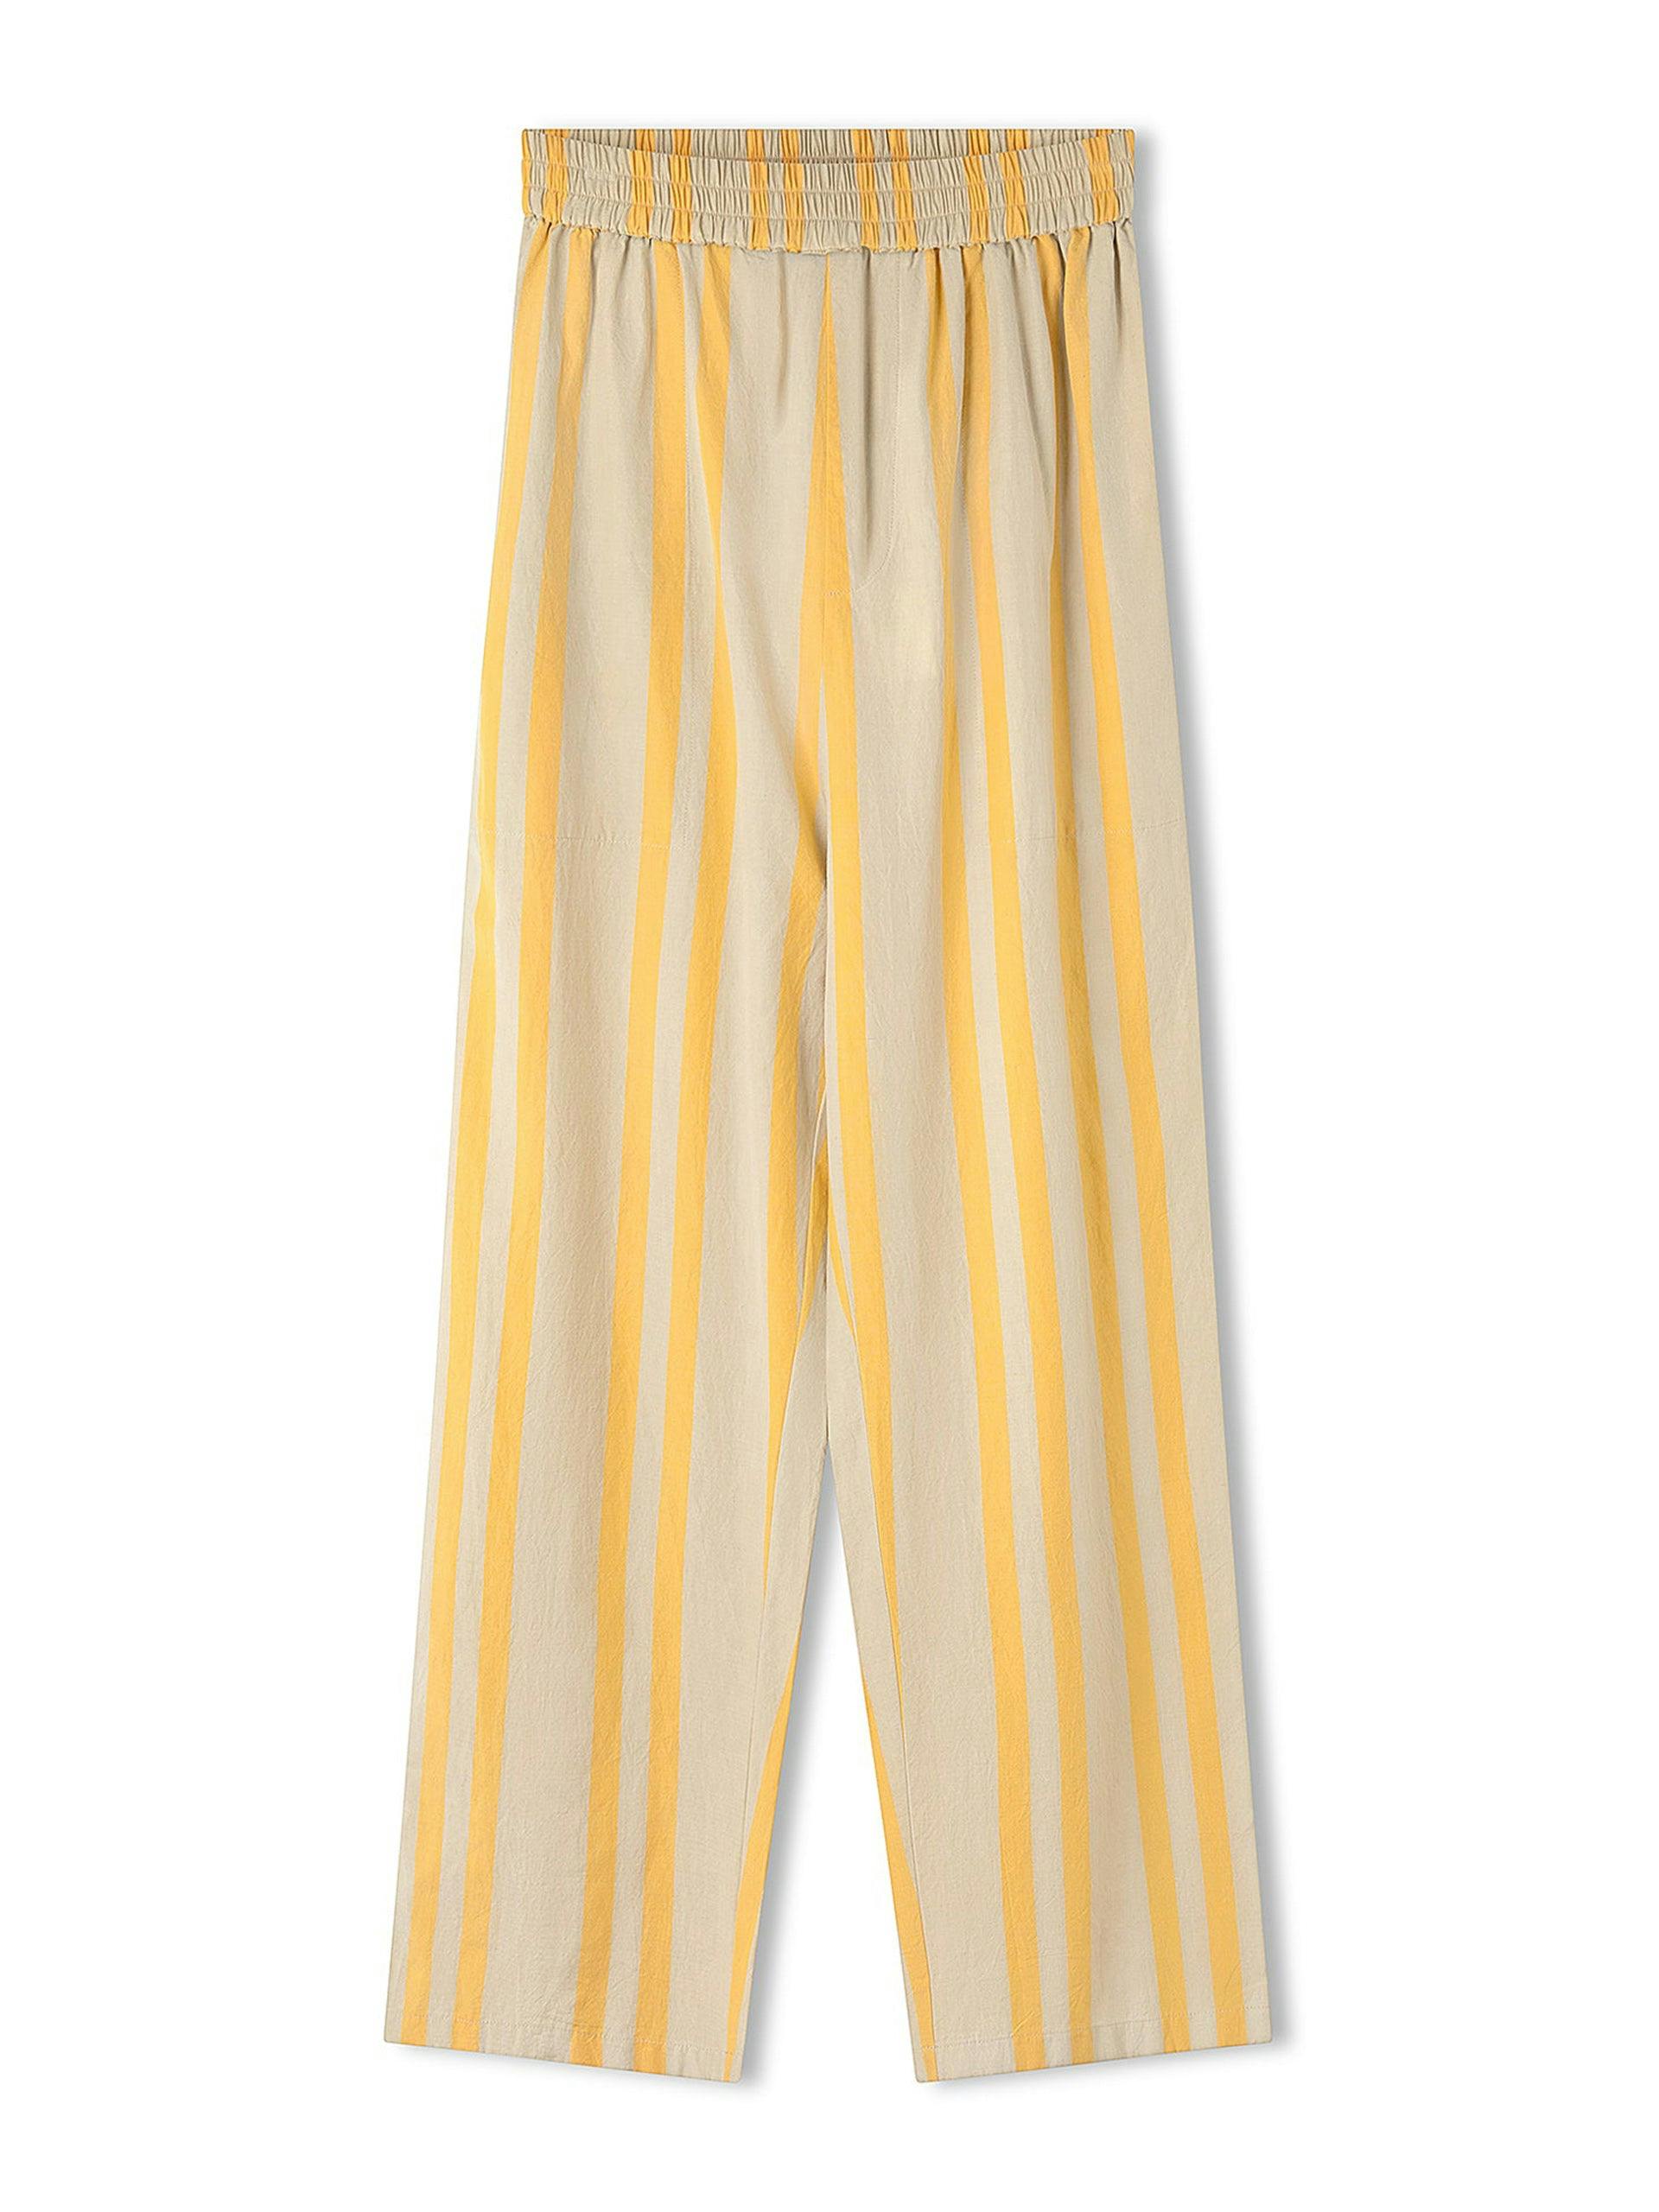 Yellow striped woven cotton trousers